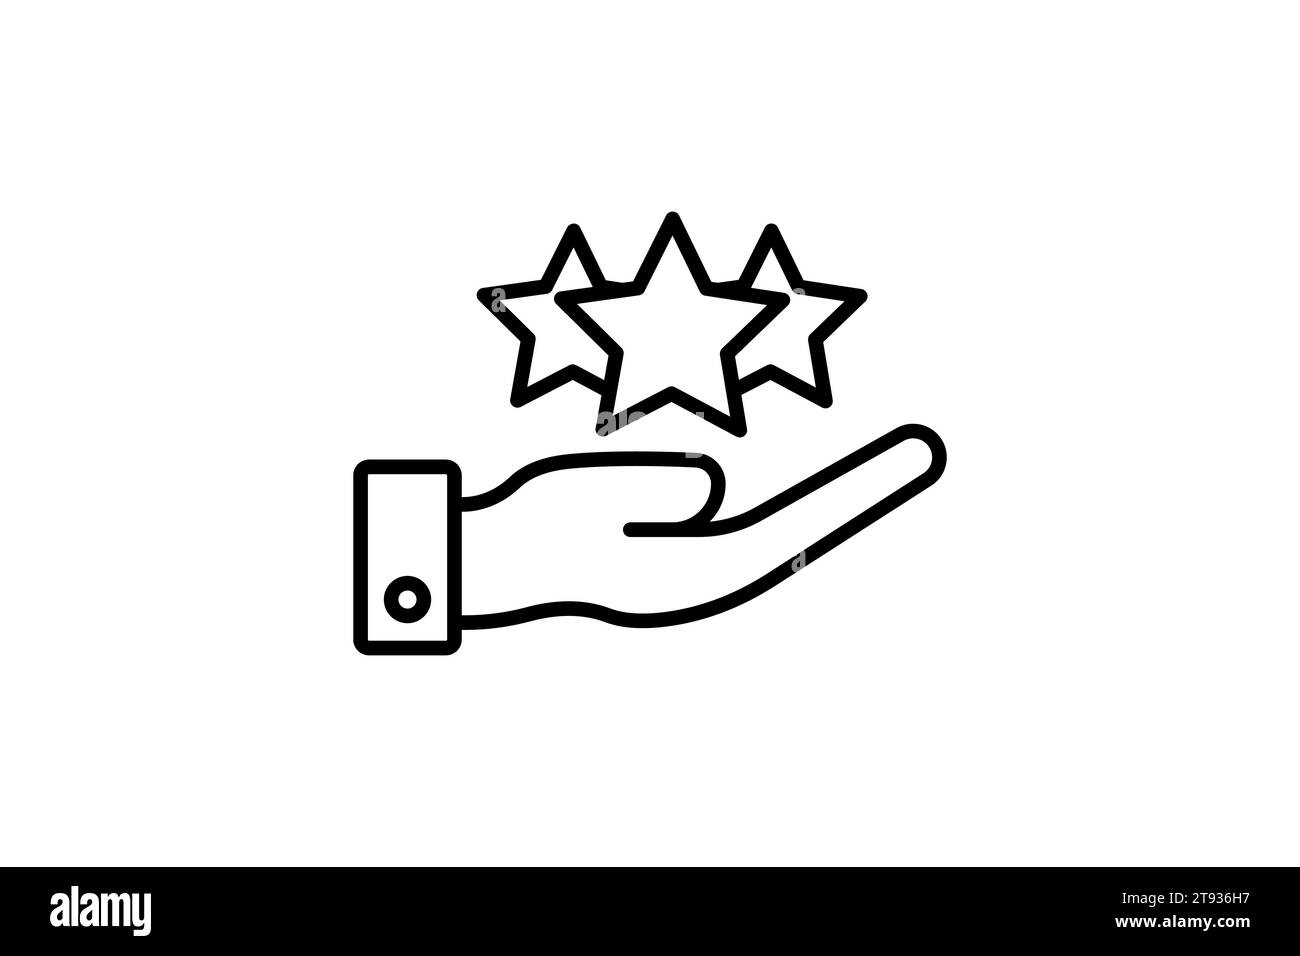 loyalty icon. hand and star. line icon style. simple vector design editable Stock Vector